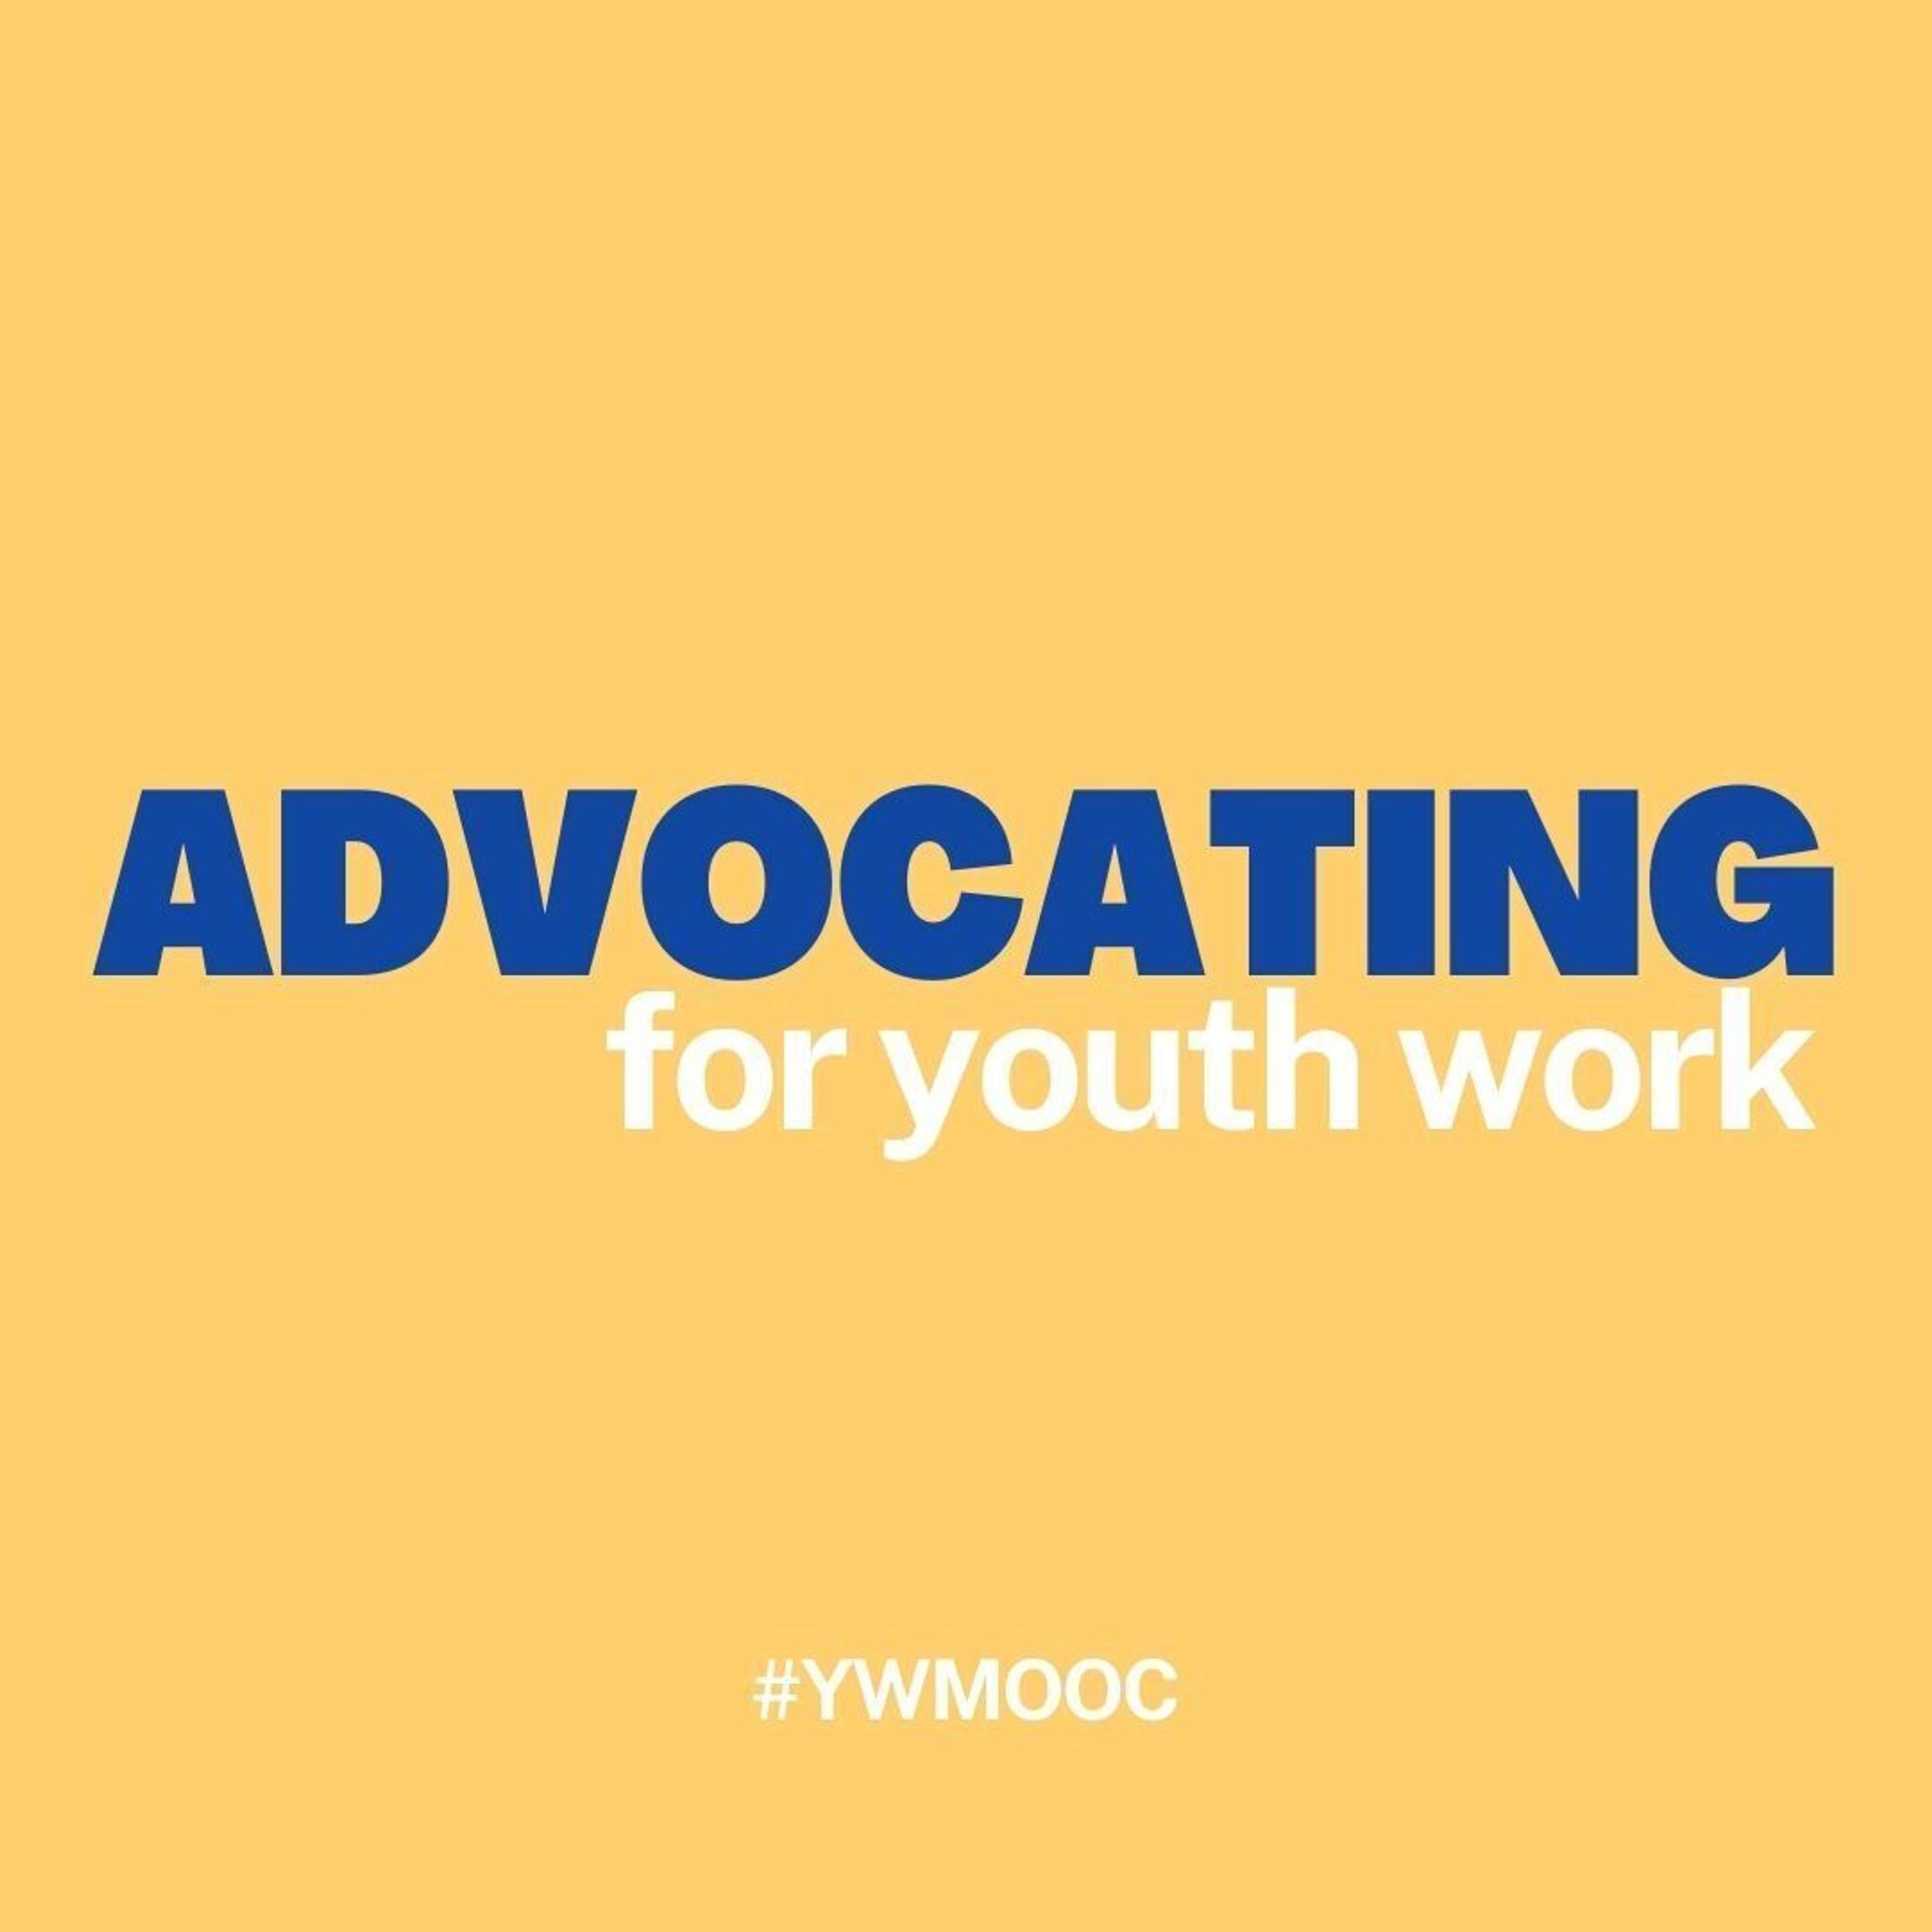 Advocating for youth work - European Youth Work Agenda in practice